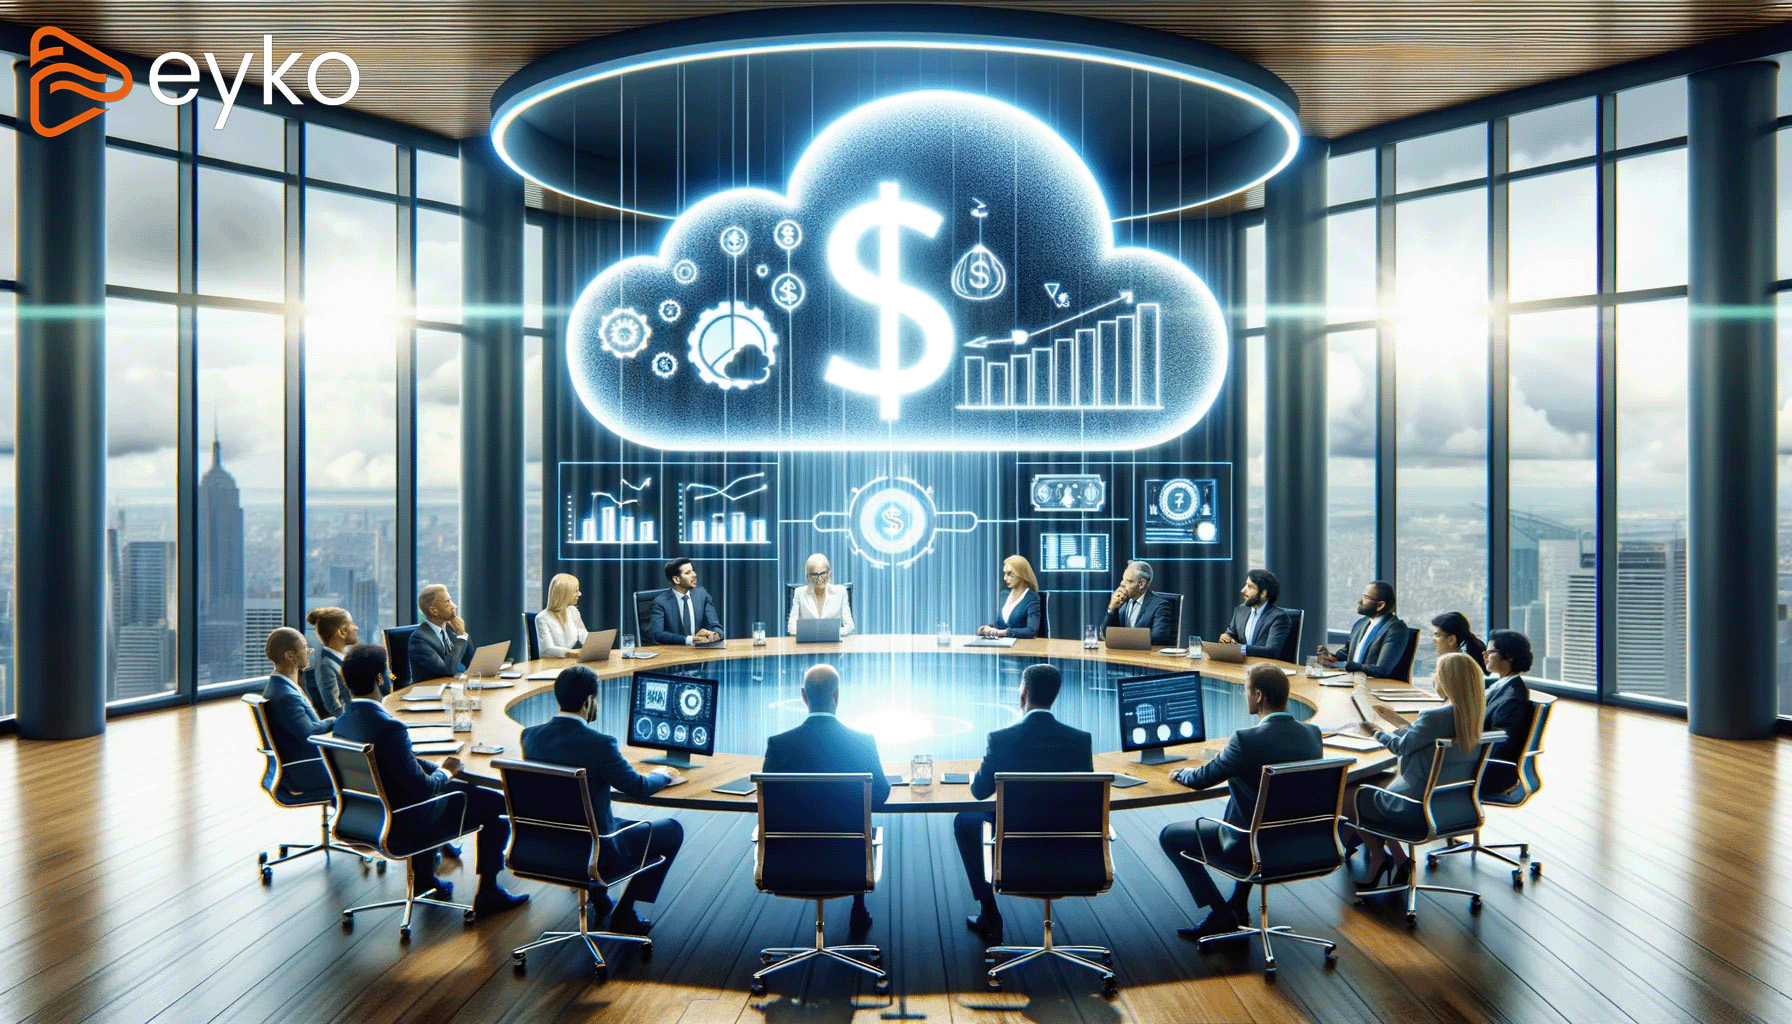 DALL·E 2023-10-31 10.55.33 - Photo-realistic image of a large, brightly lit corporate boardroom. At the center of the room is a round table with a 3D holographic_w Logo